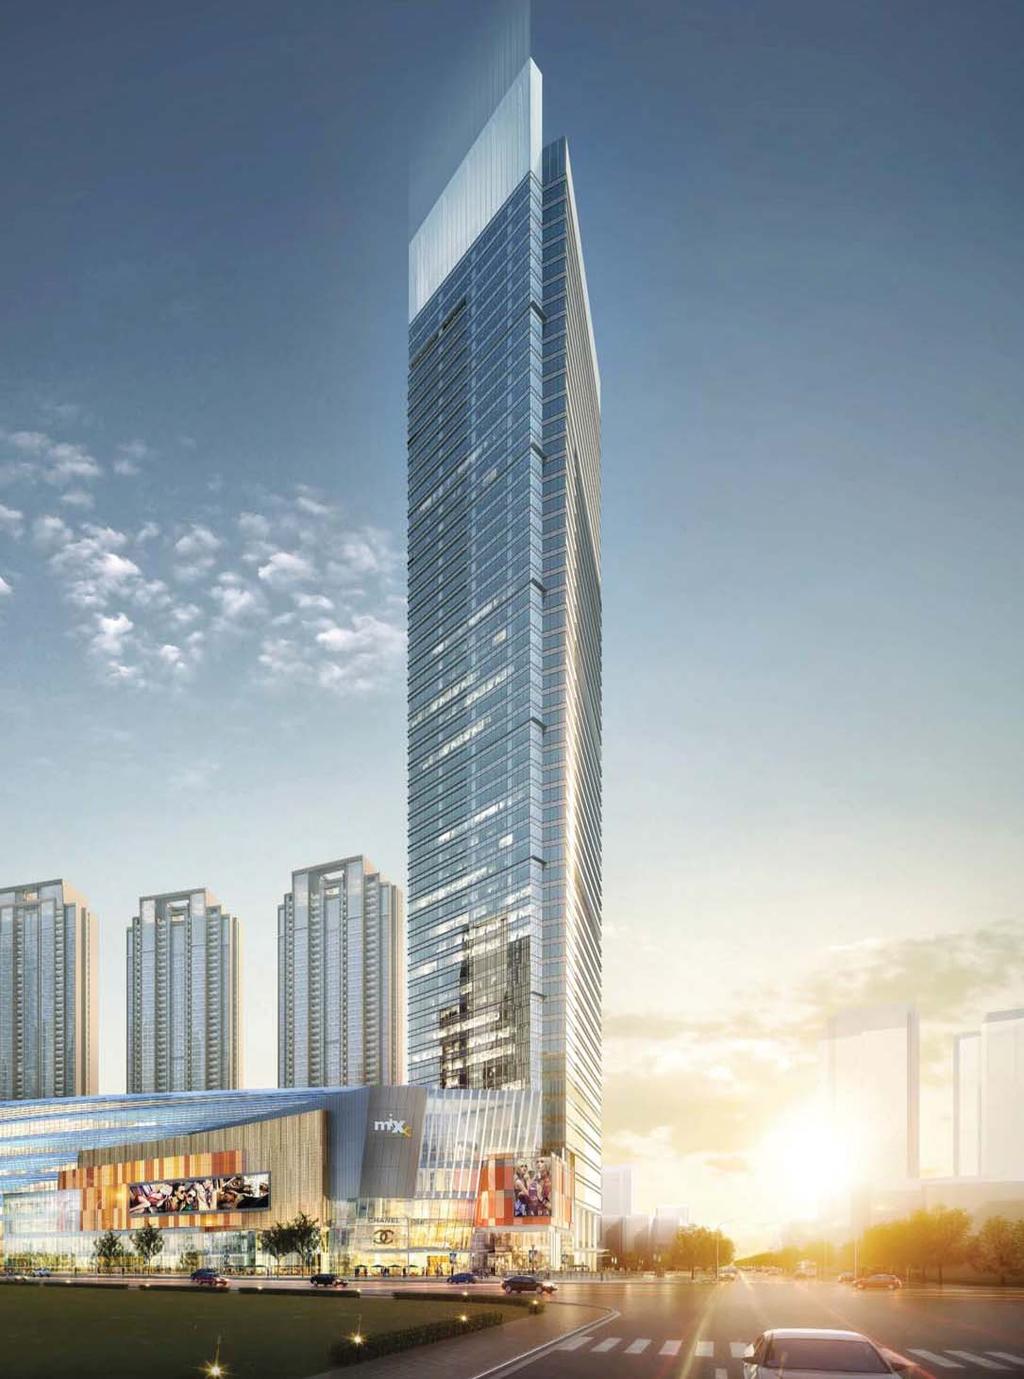 HIGH RISE & HOTEL LOCATION Wanxiang City, Wuhan, China SIZE Shopping Center 1,668,406 SF For-Sale-Retail 118,403 SF Office 2 towers at 53 stories and 38 stories 1,668,406 SF Residential 4